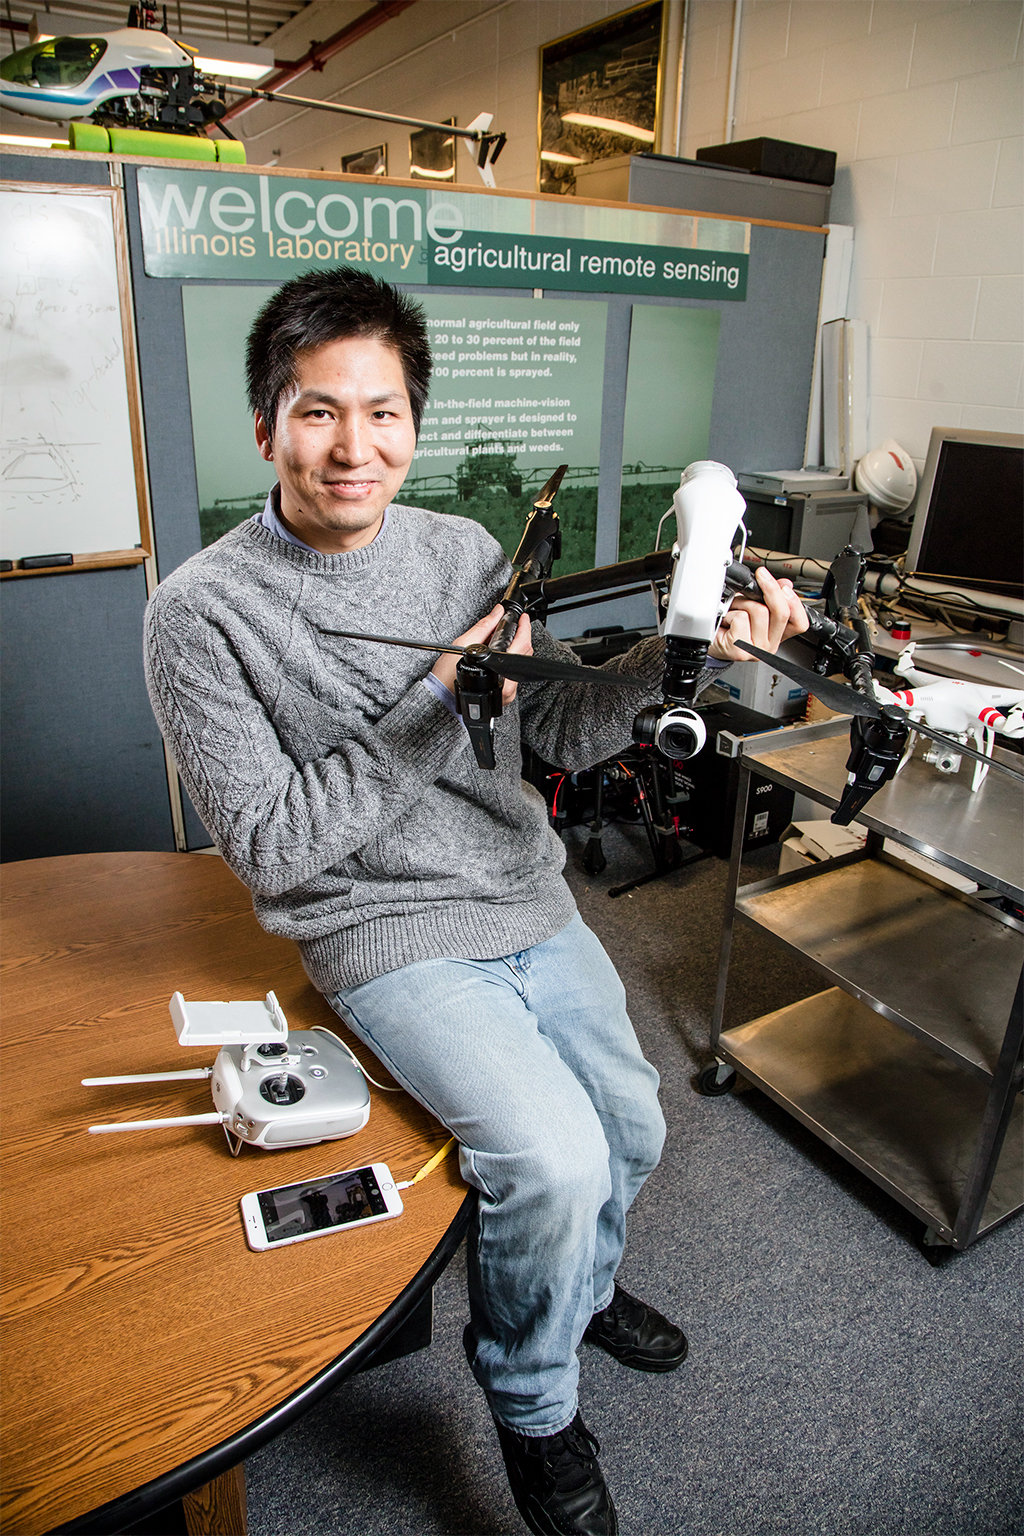 Student showing off an agricultural drone.